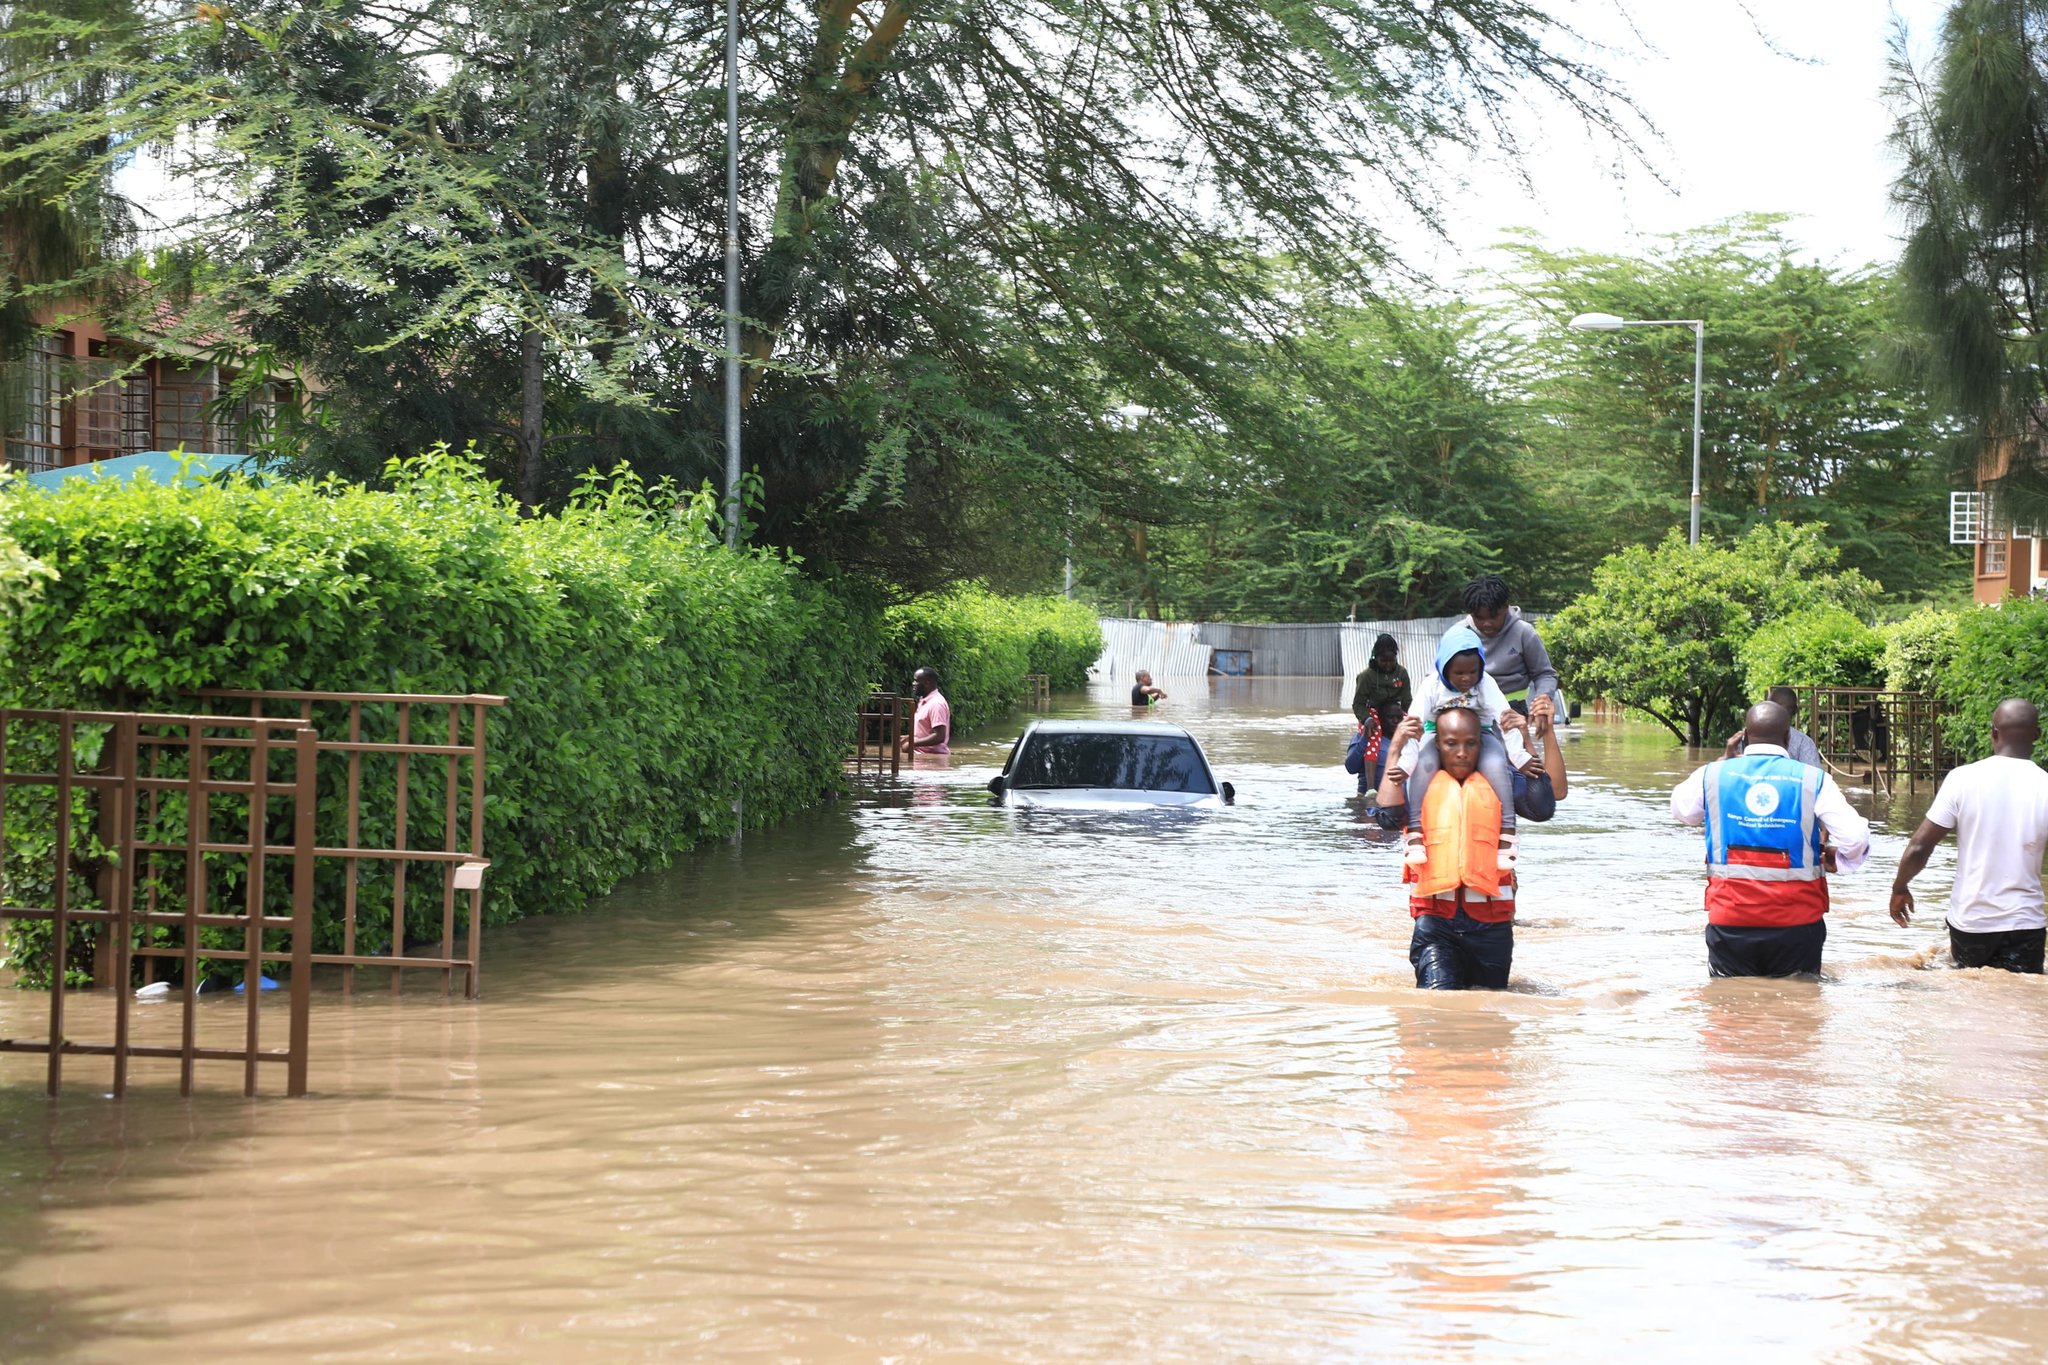 National Police Service Leading Flood Search and Rescue Operations Across Kenya